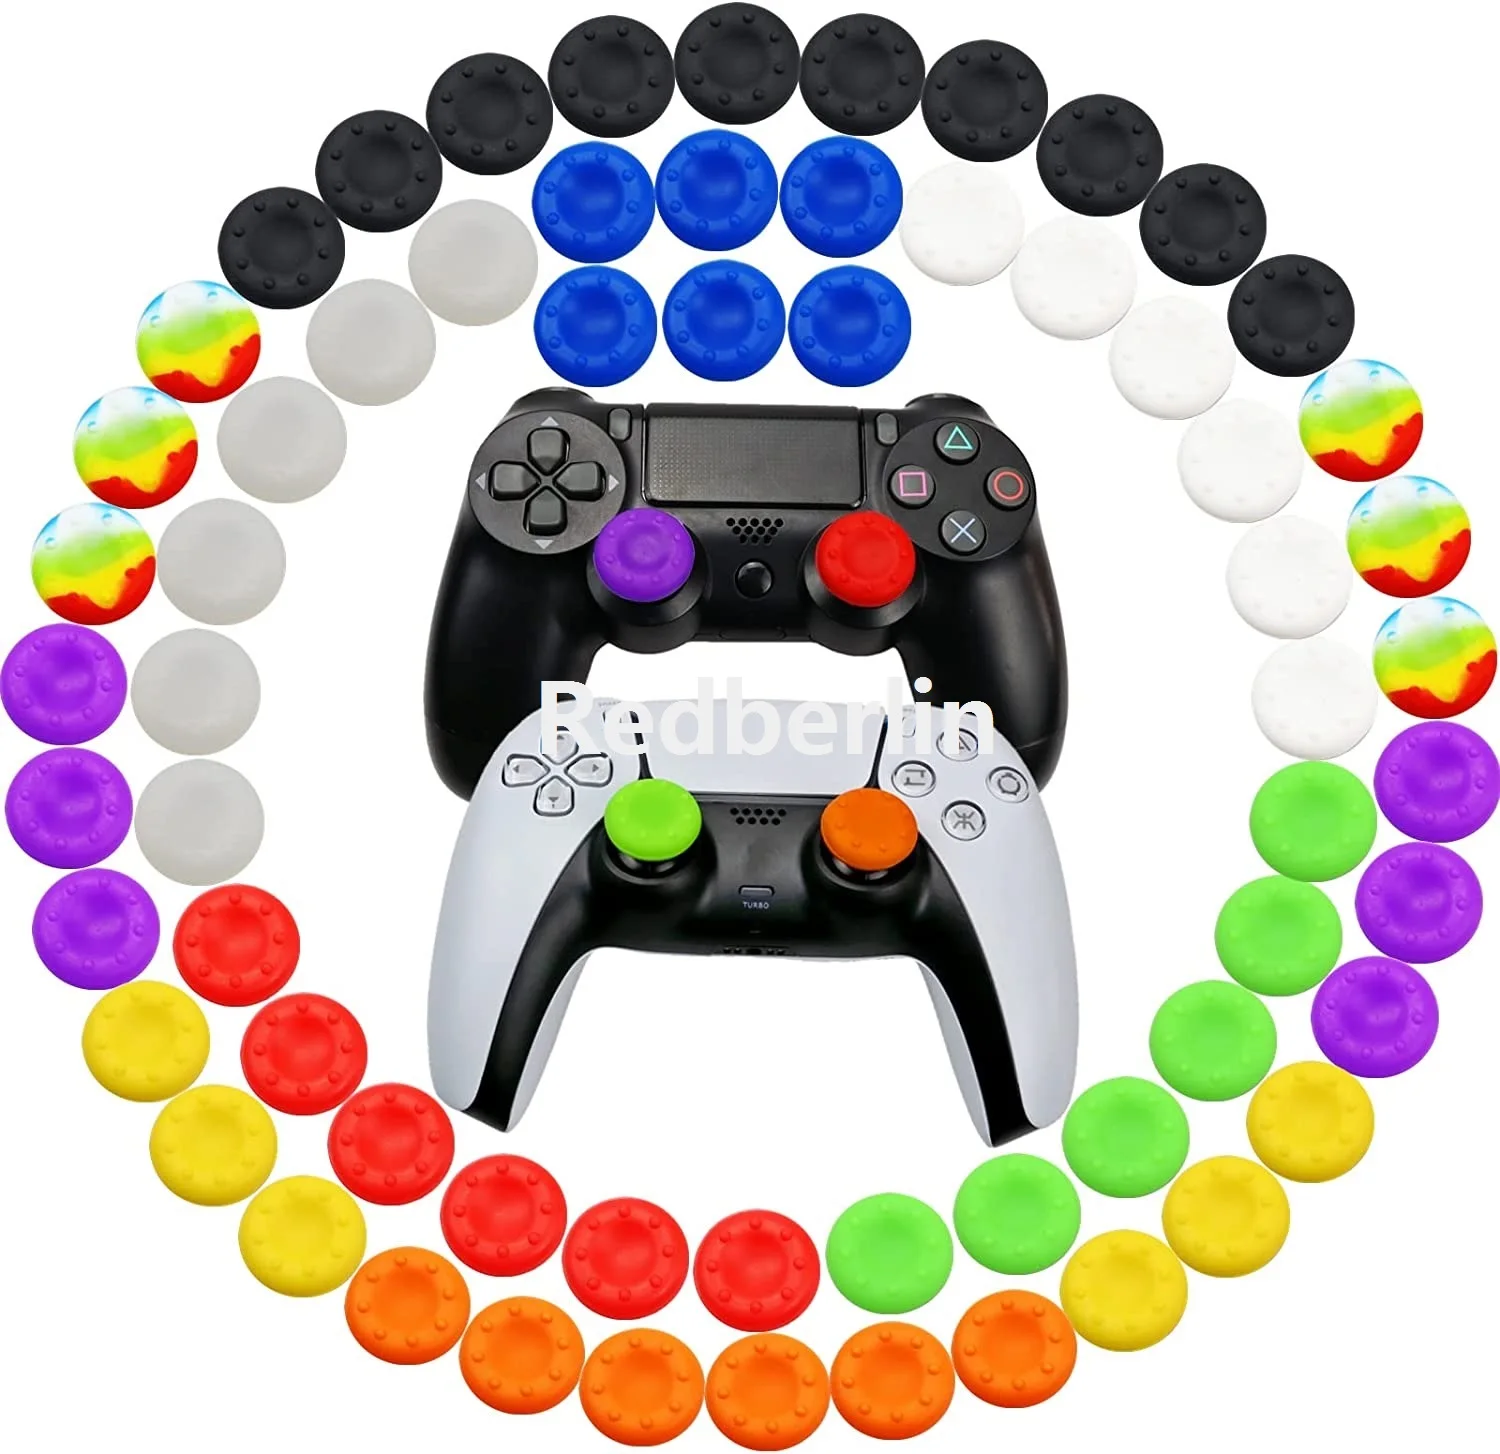 

200pcs Silicone Thumb Grips Cap Cover Joystick Controller Rubber Grip Replacement for PS2 PS3 PS4 PS5 Xbox 360 / One X/S